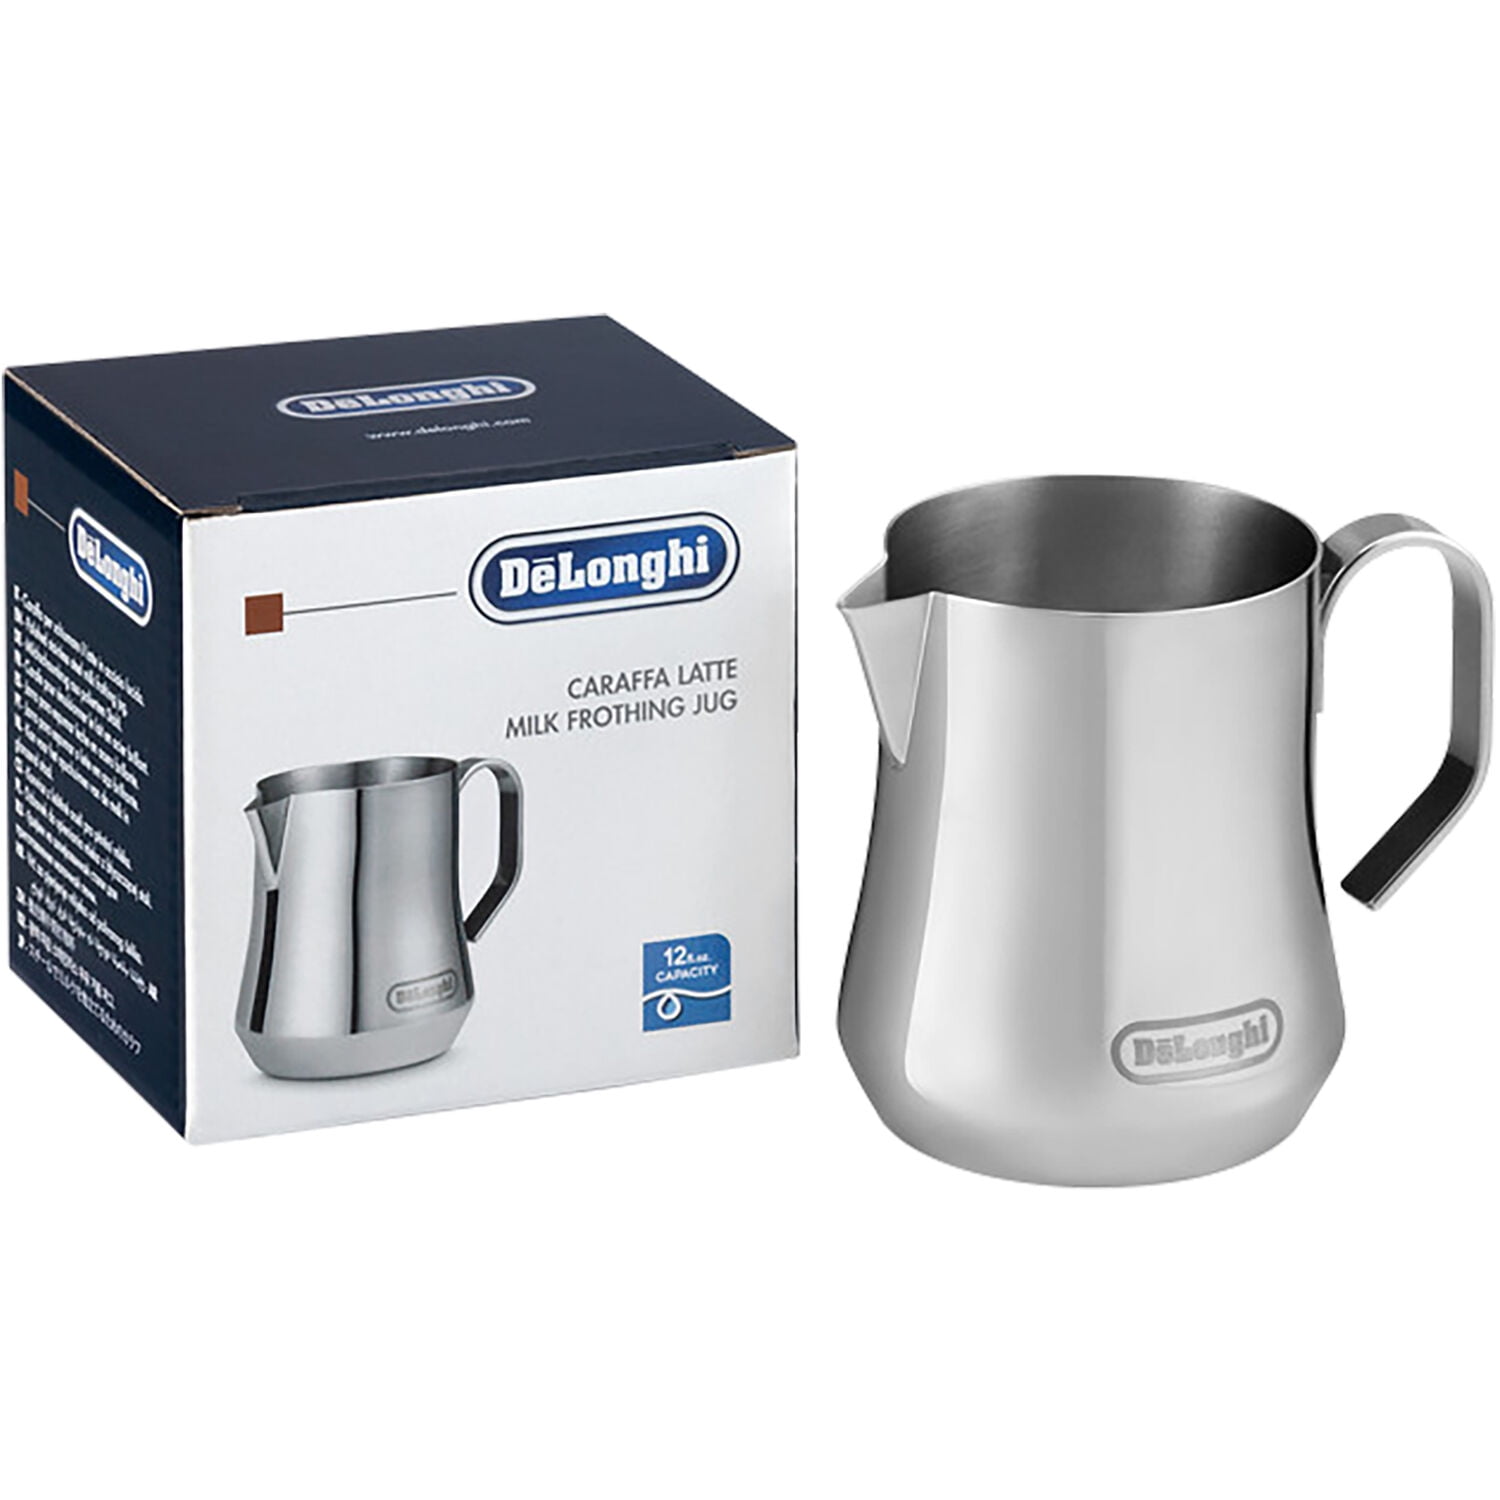 De'Longhi Stainless Steel Milk Frothing Pitcher, 12 ounce (350 ml), Barista  Tool, Frother Jug for Espresso Machine Coffee Cappuccino Latte Art, DLSC0 -  Imported Products from USA - iBhejo